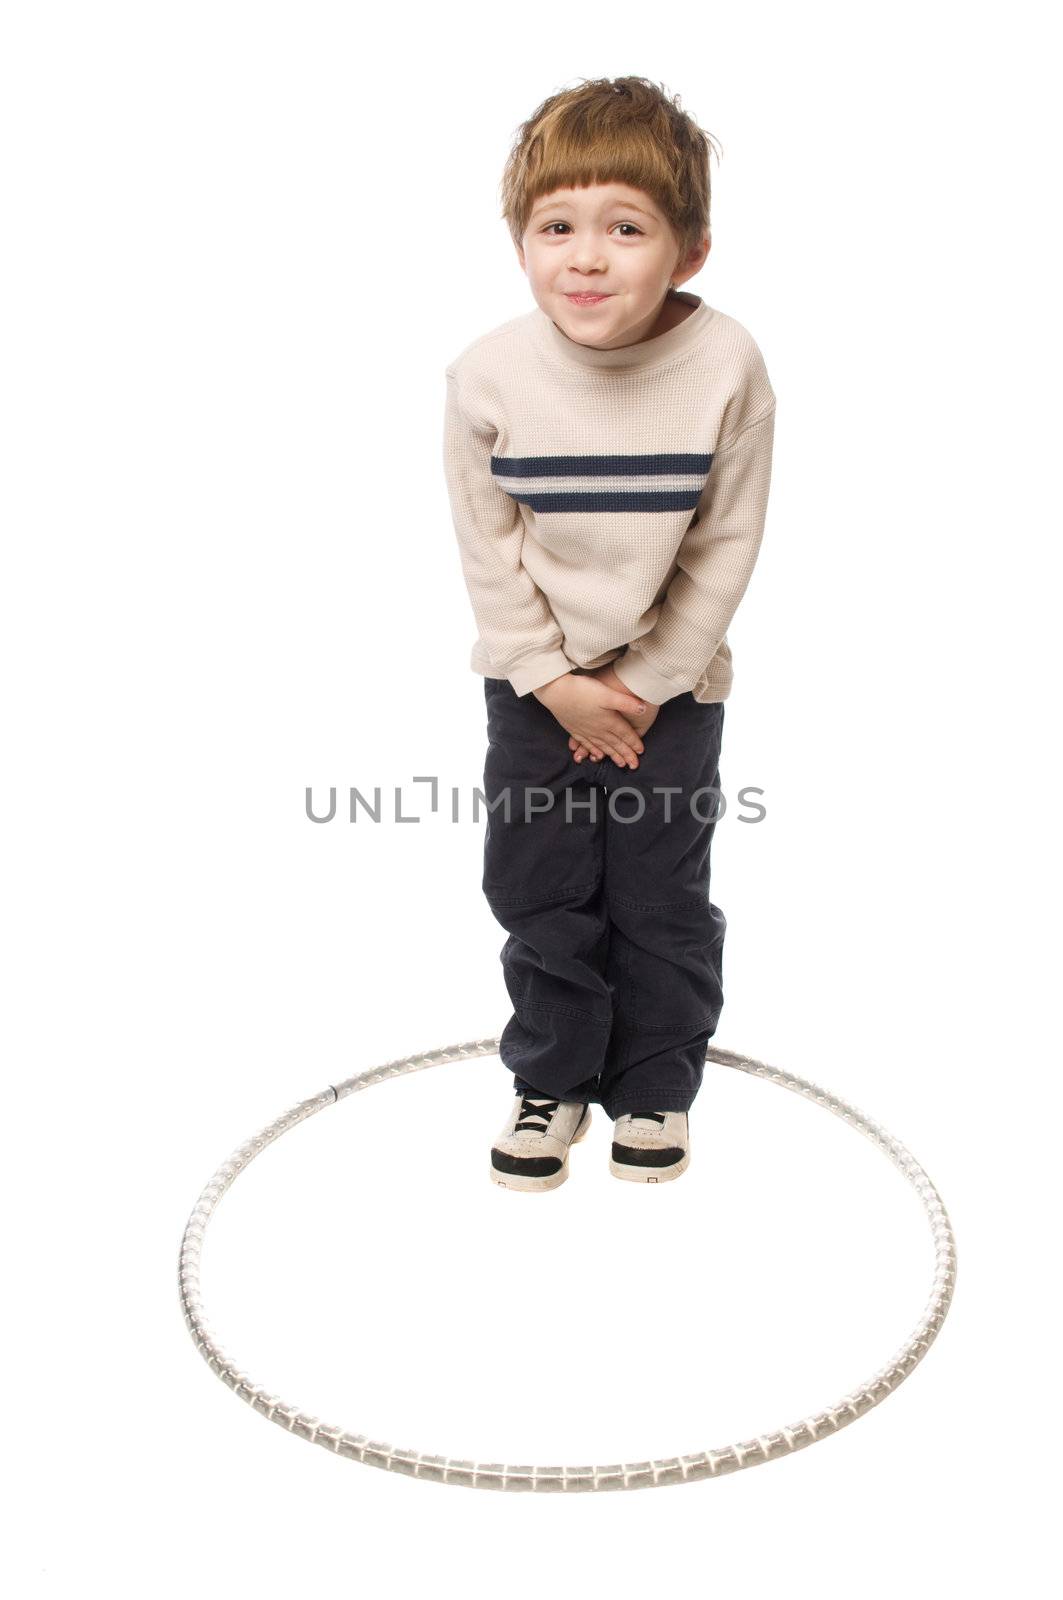 young boy standing and acting silly on a white background